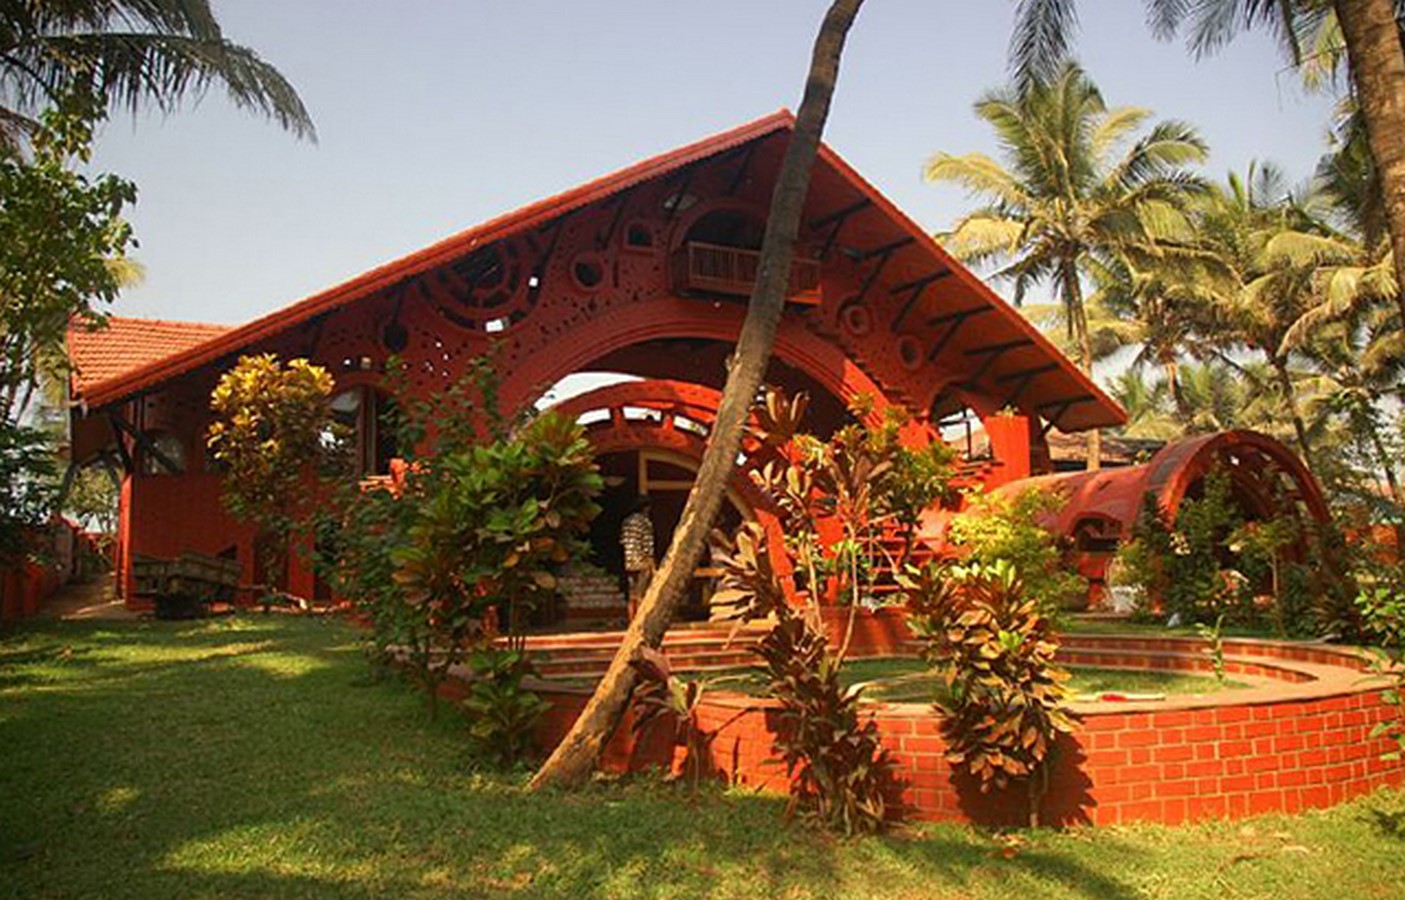 Mehta's bungalow by Nari Gandhi: The unconventional house- Sheet1